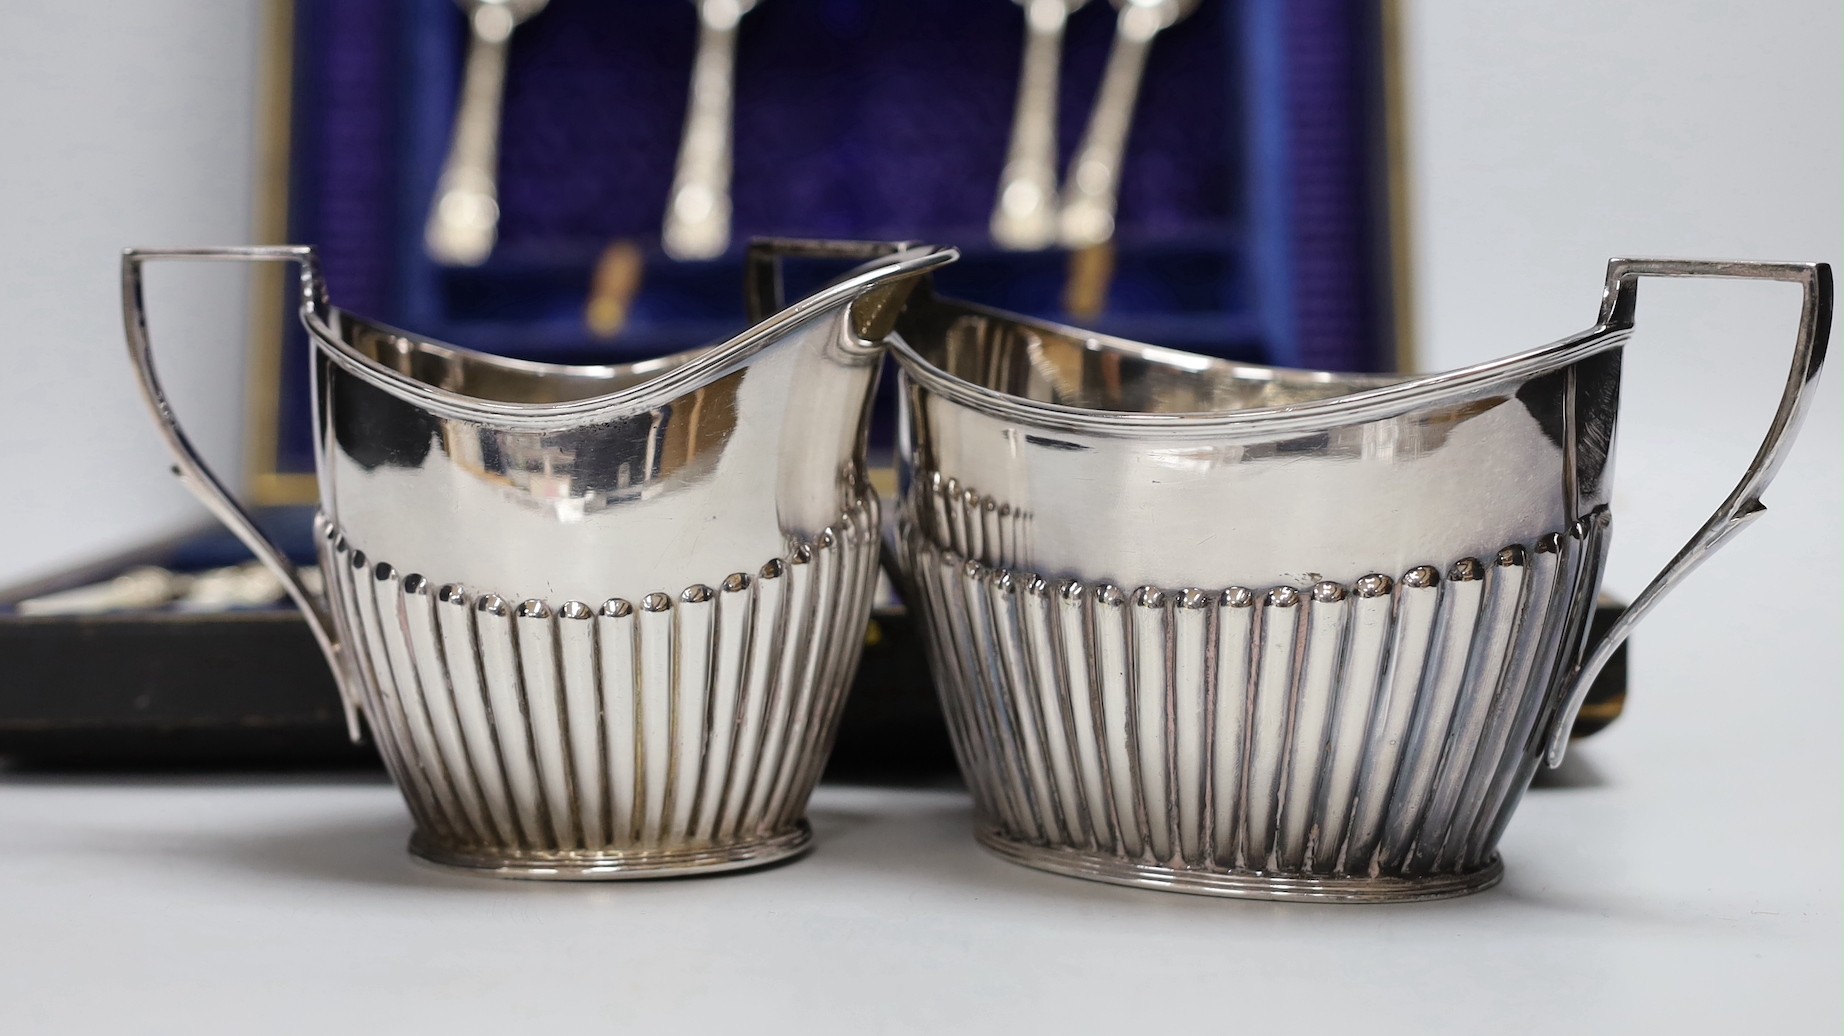 Six pairs of silver plated and engraved dessert knives and forks, with server, mother of pearl handles and six teaspoons (cased) and a silver plated cream jug and sugar bowl.